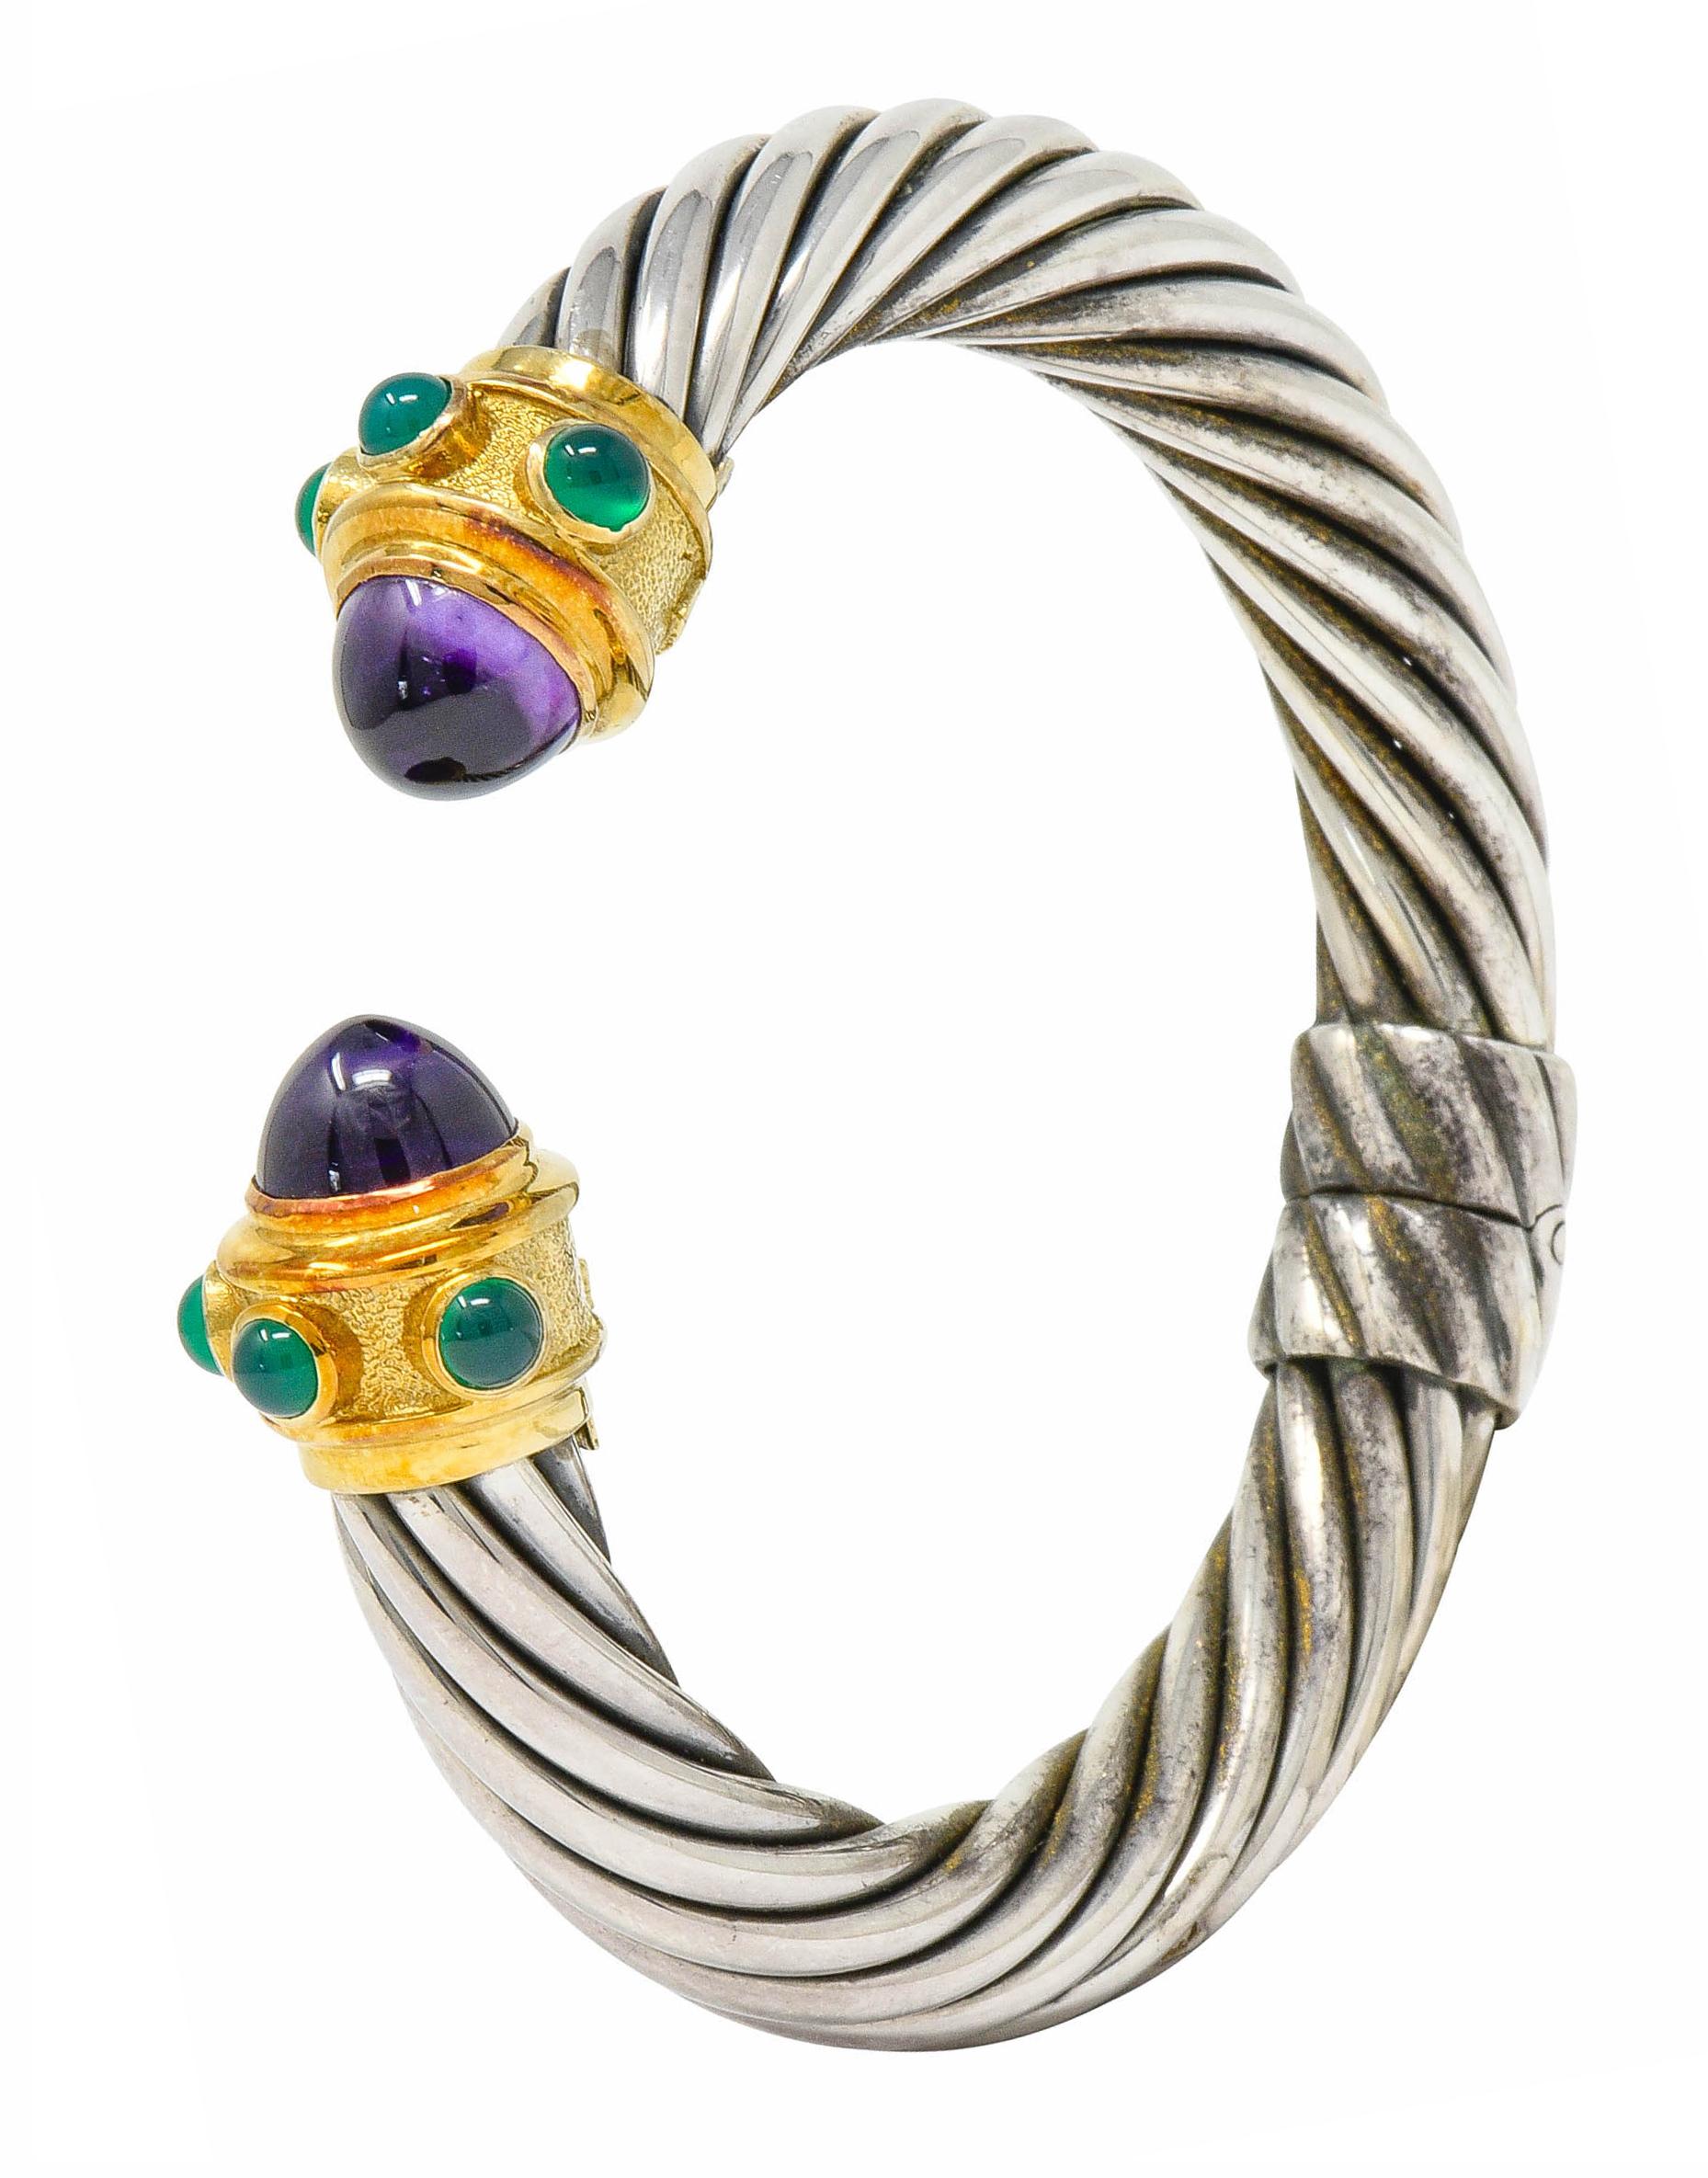 Hinged cuff style bracelet comprised of sterling silver twisted cable motif

Terminating as gold set with bullet cabochon amethysts; incredibly well-matched, transparent, purple in color

Accented by 4.0 mm round chrysoprase cabochon; translucent,